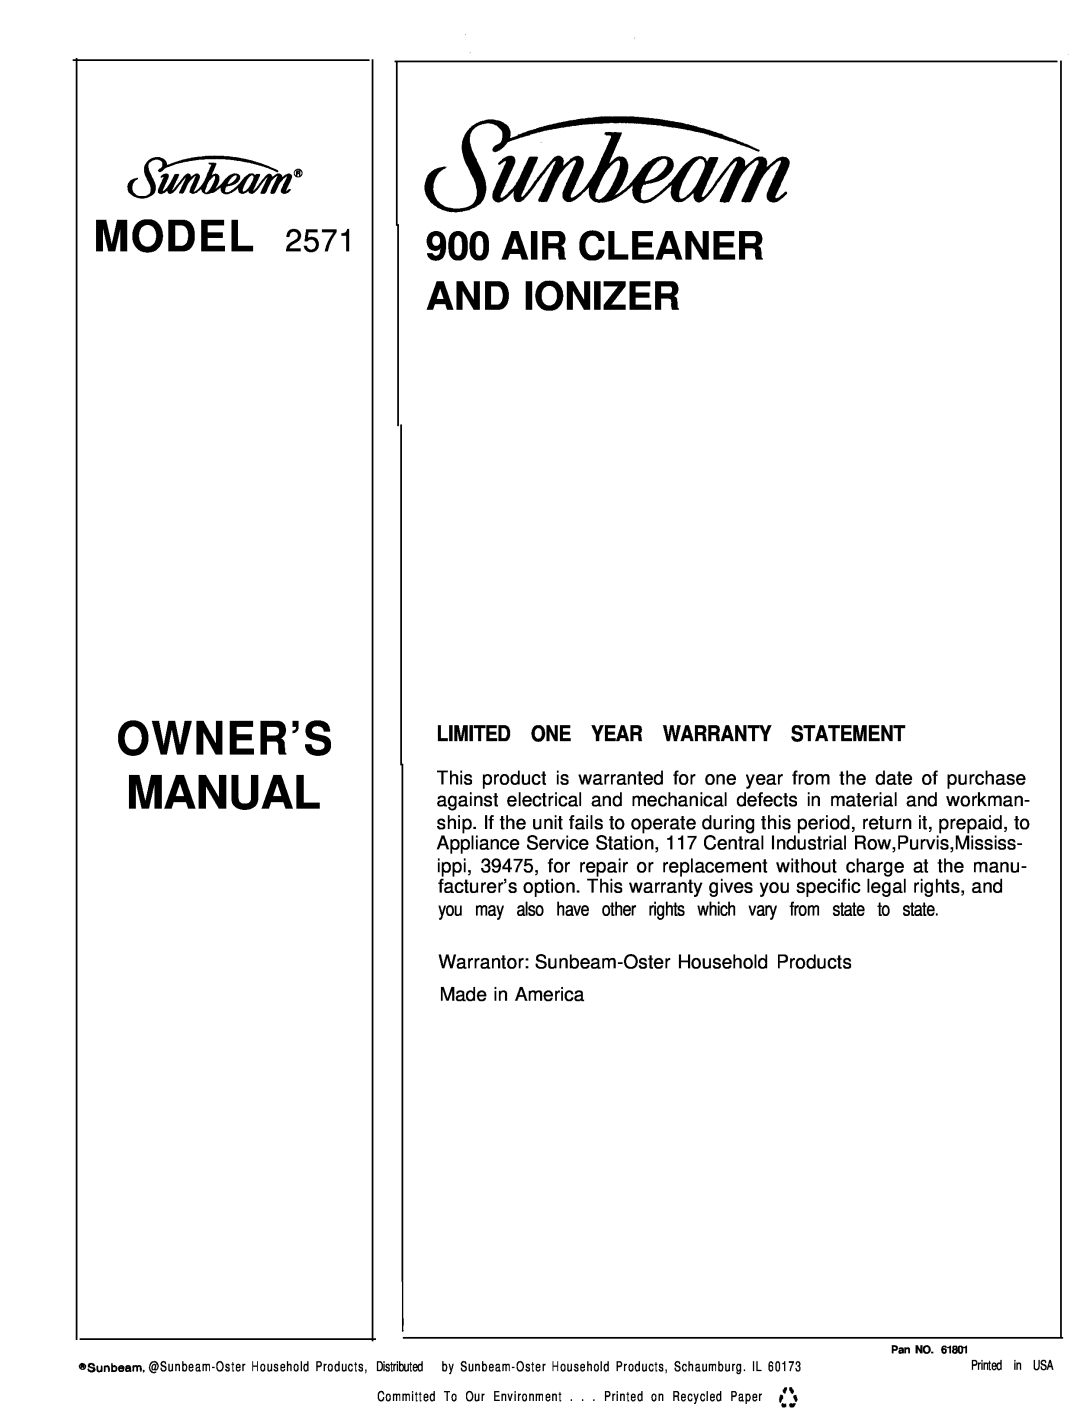 Sunbeam 2571 owner manual Limited One Year Warranty Statement, Model, Air Cleaner And Ionizer 